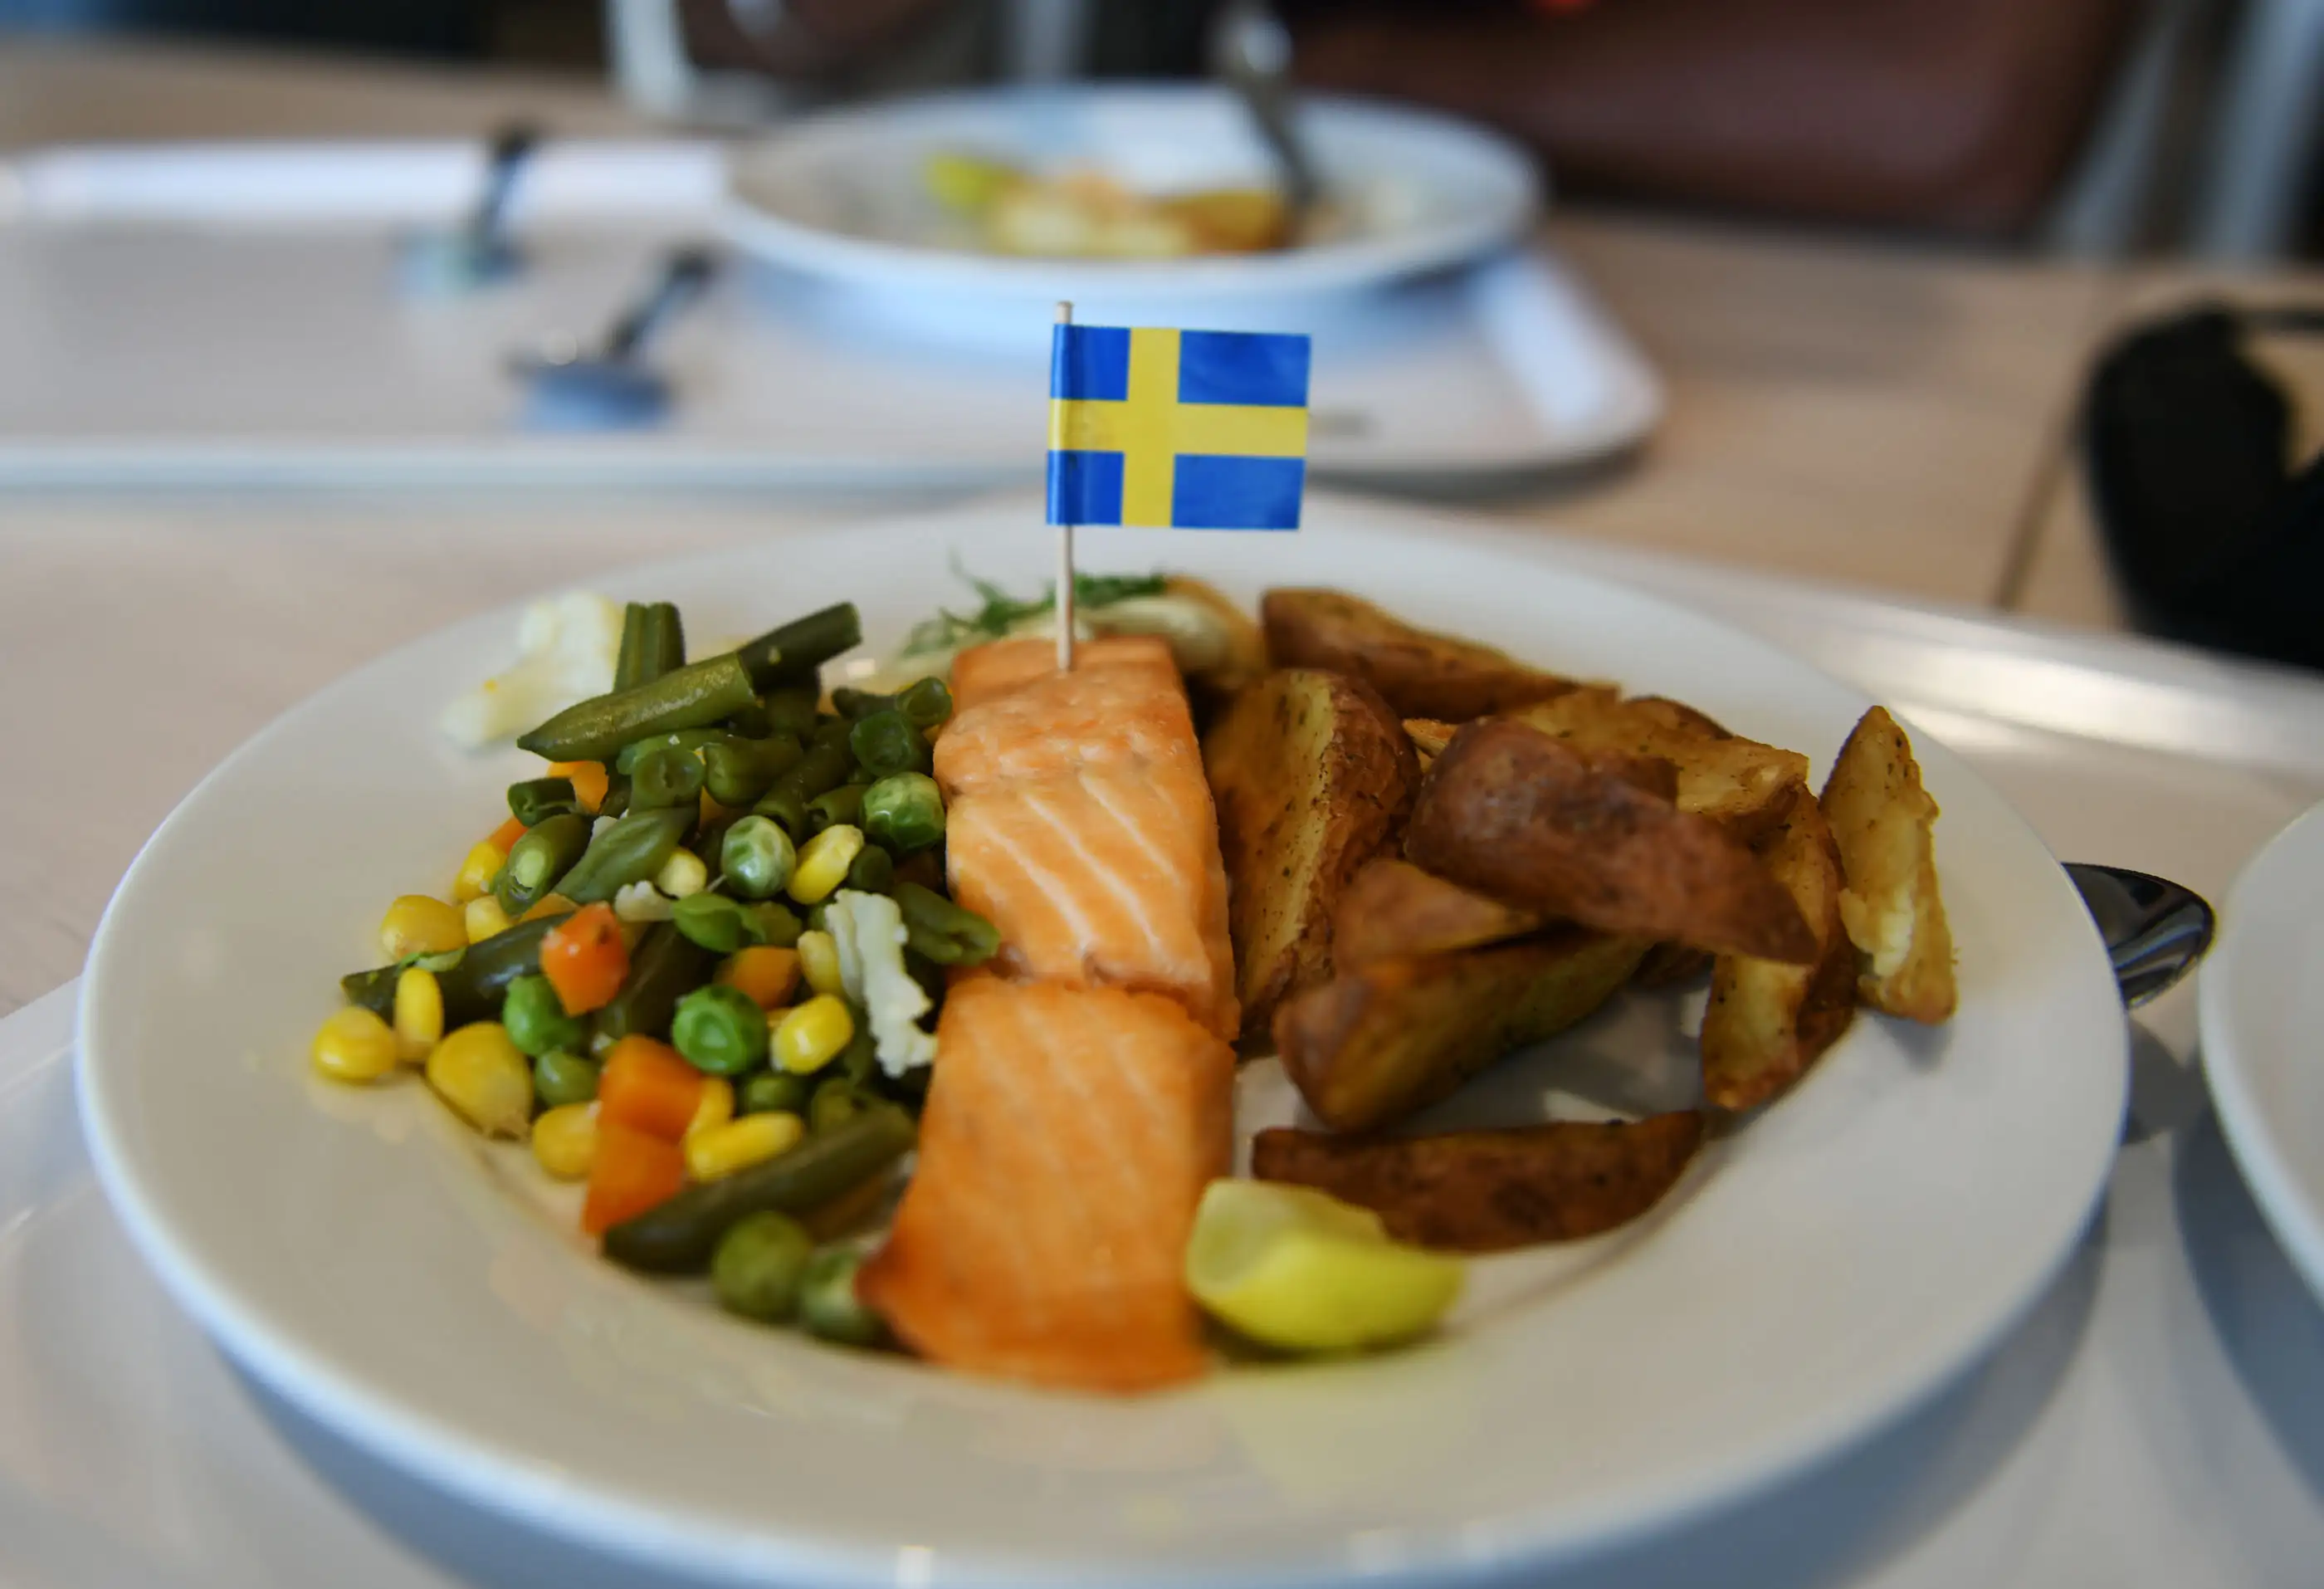 The Swedish national flag is seem placed on a plate of food at the restaurant section the new IKEA store in Hyderabad on August 8, 2018.